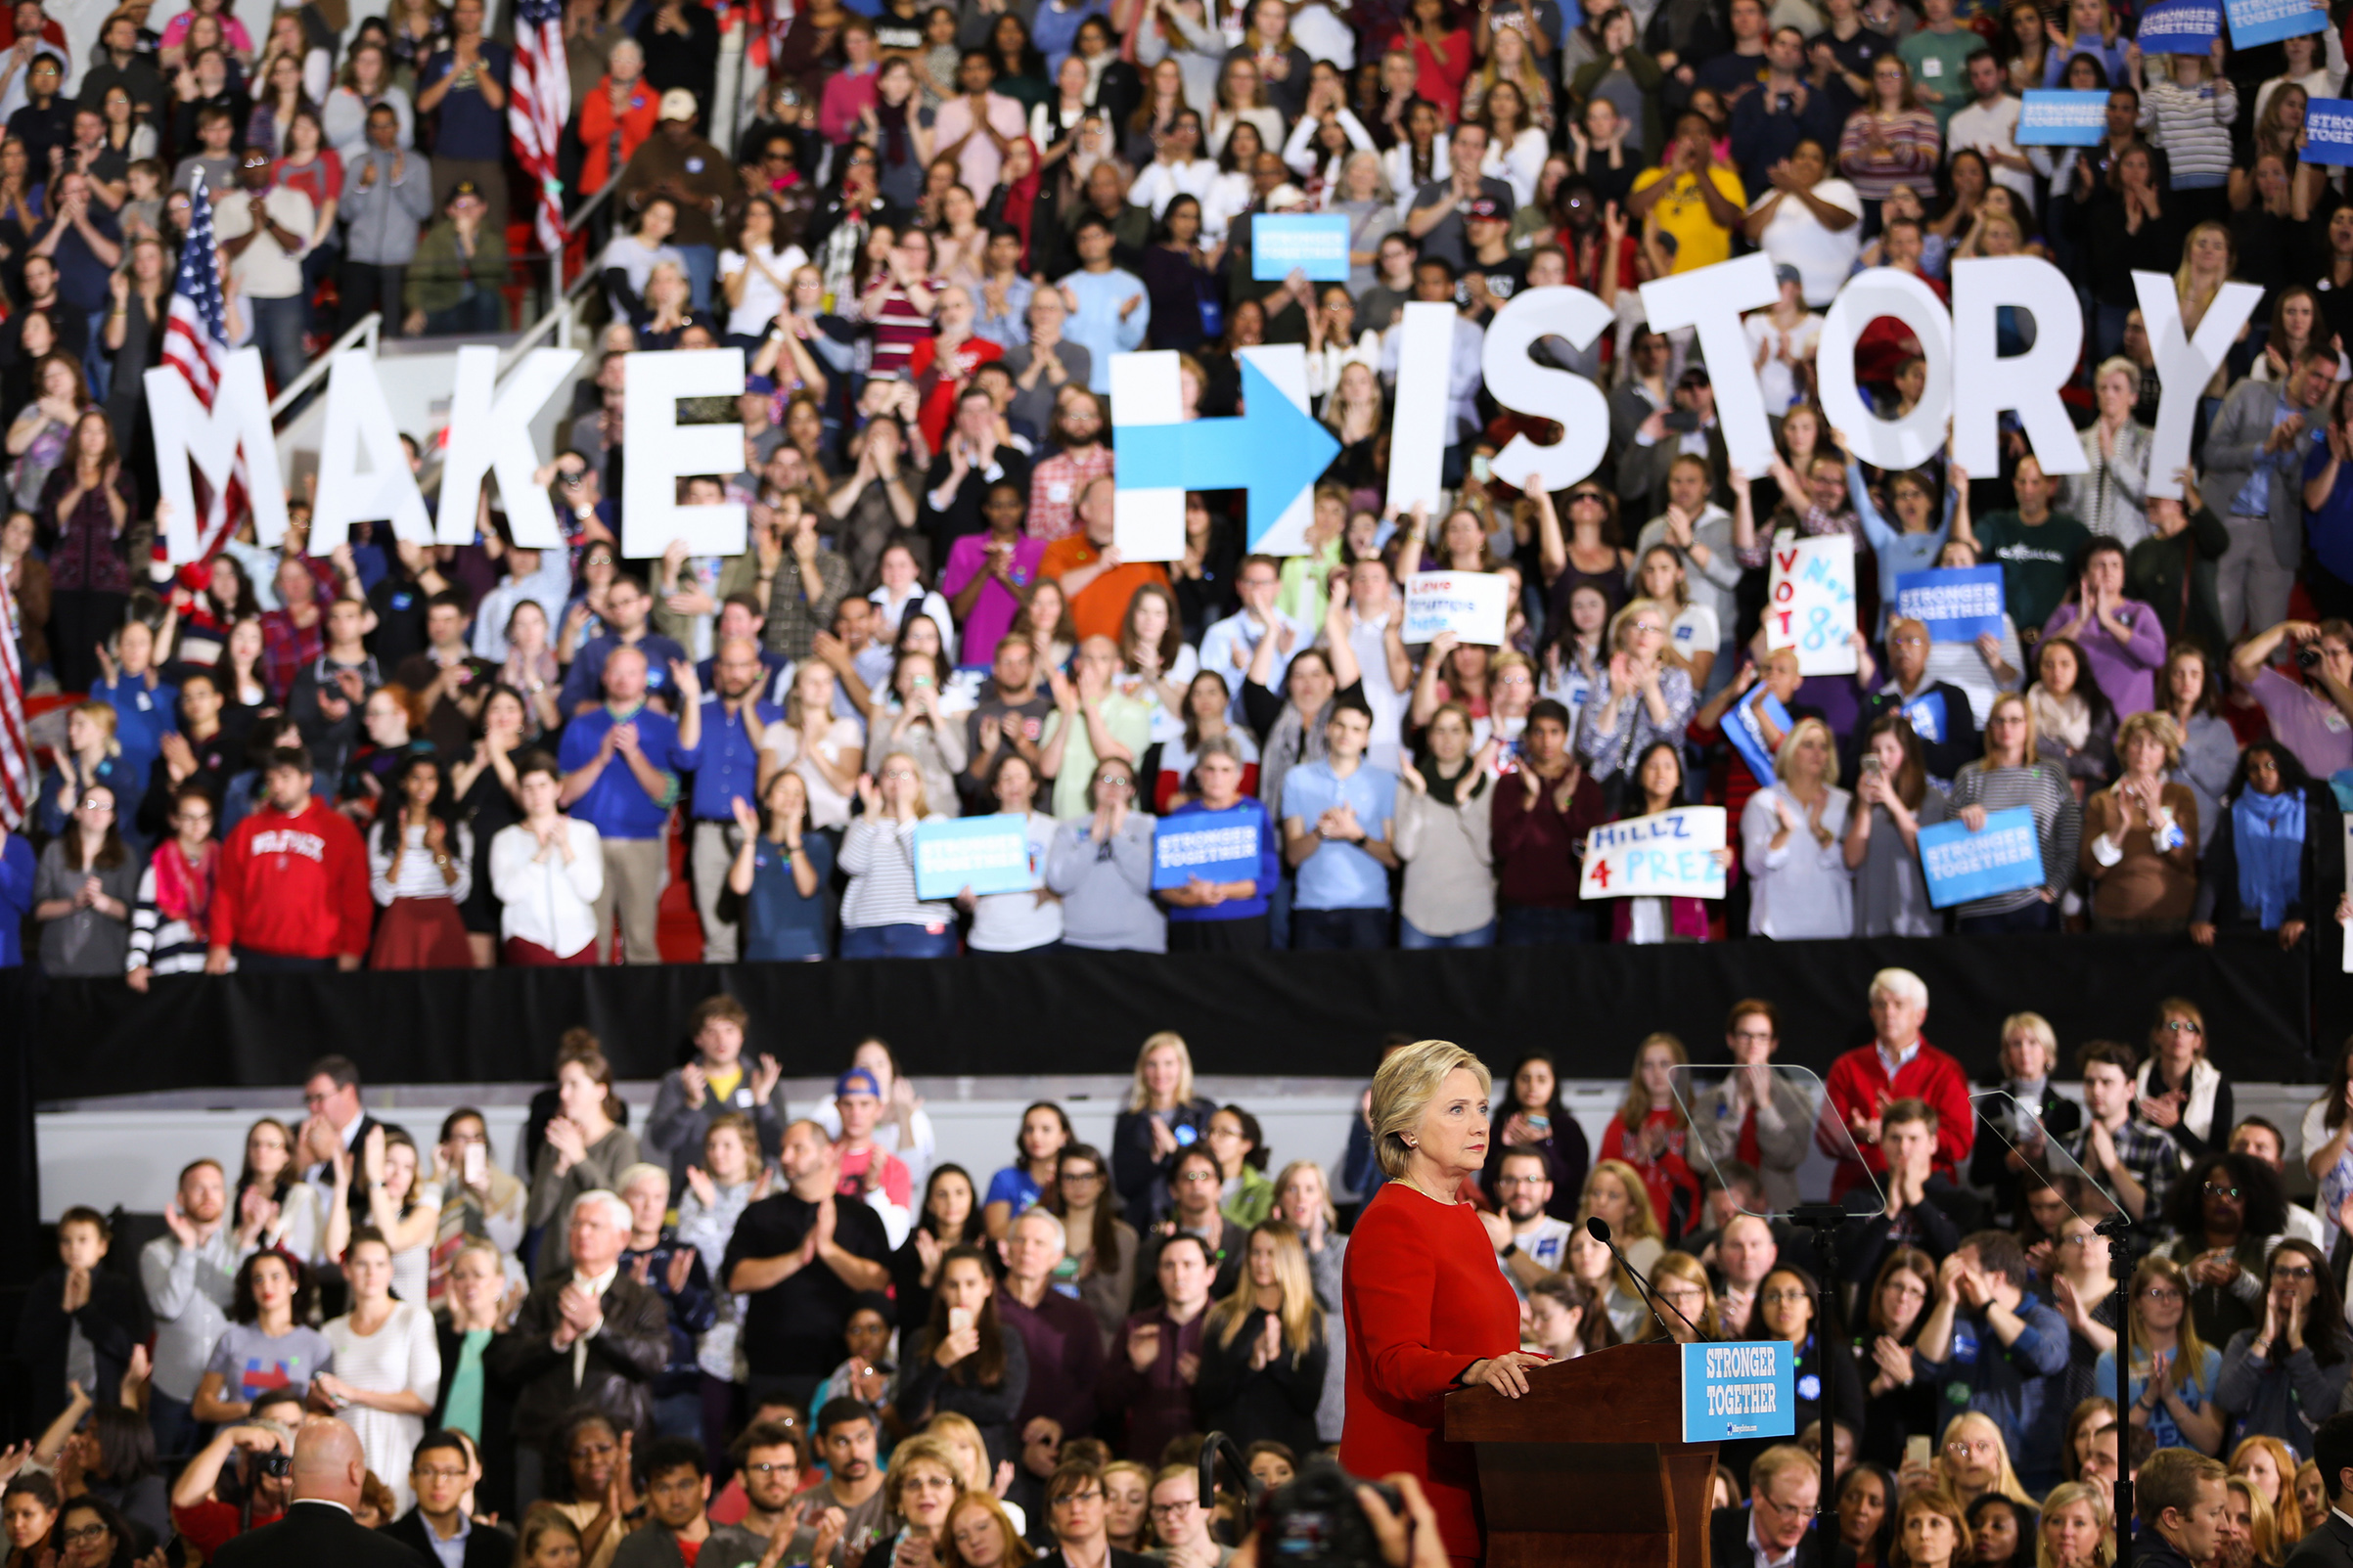 Hillary Clinton addresses the crowd of supporters inside the Reynolds Coliseum on the campus of North Carolina State University on the final campaign stop before election day, in Raleigh, N.C., on Nov. 7, 2016. (Logan Cyrus—AFP/Getty Images)